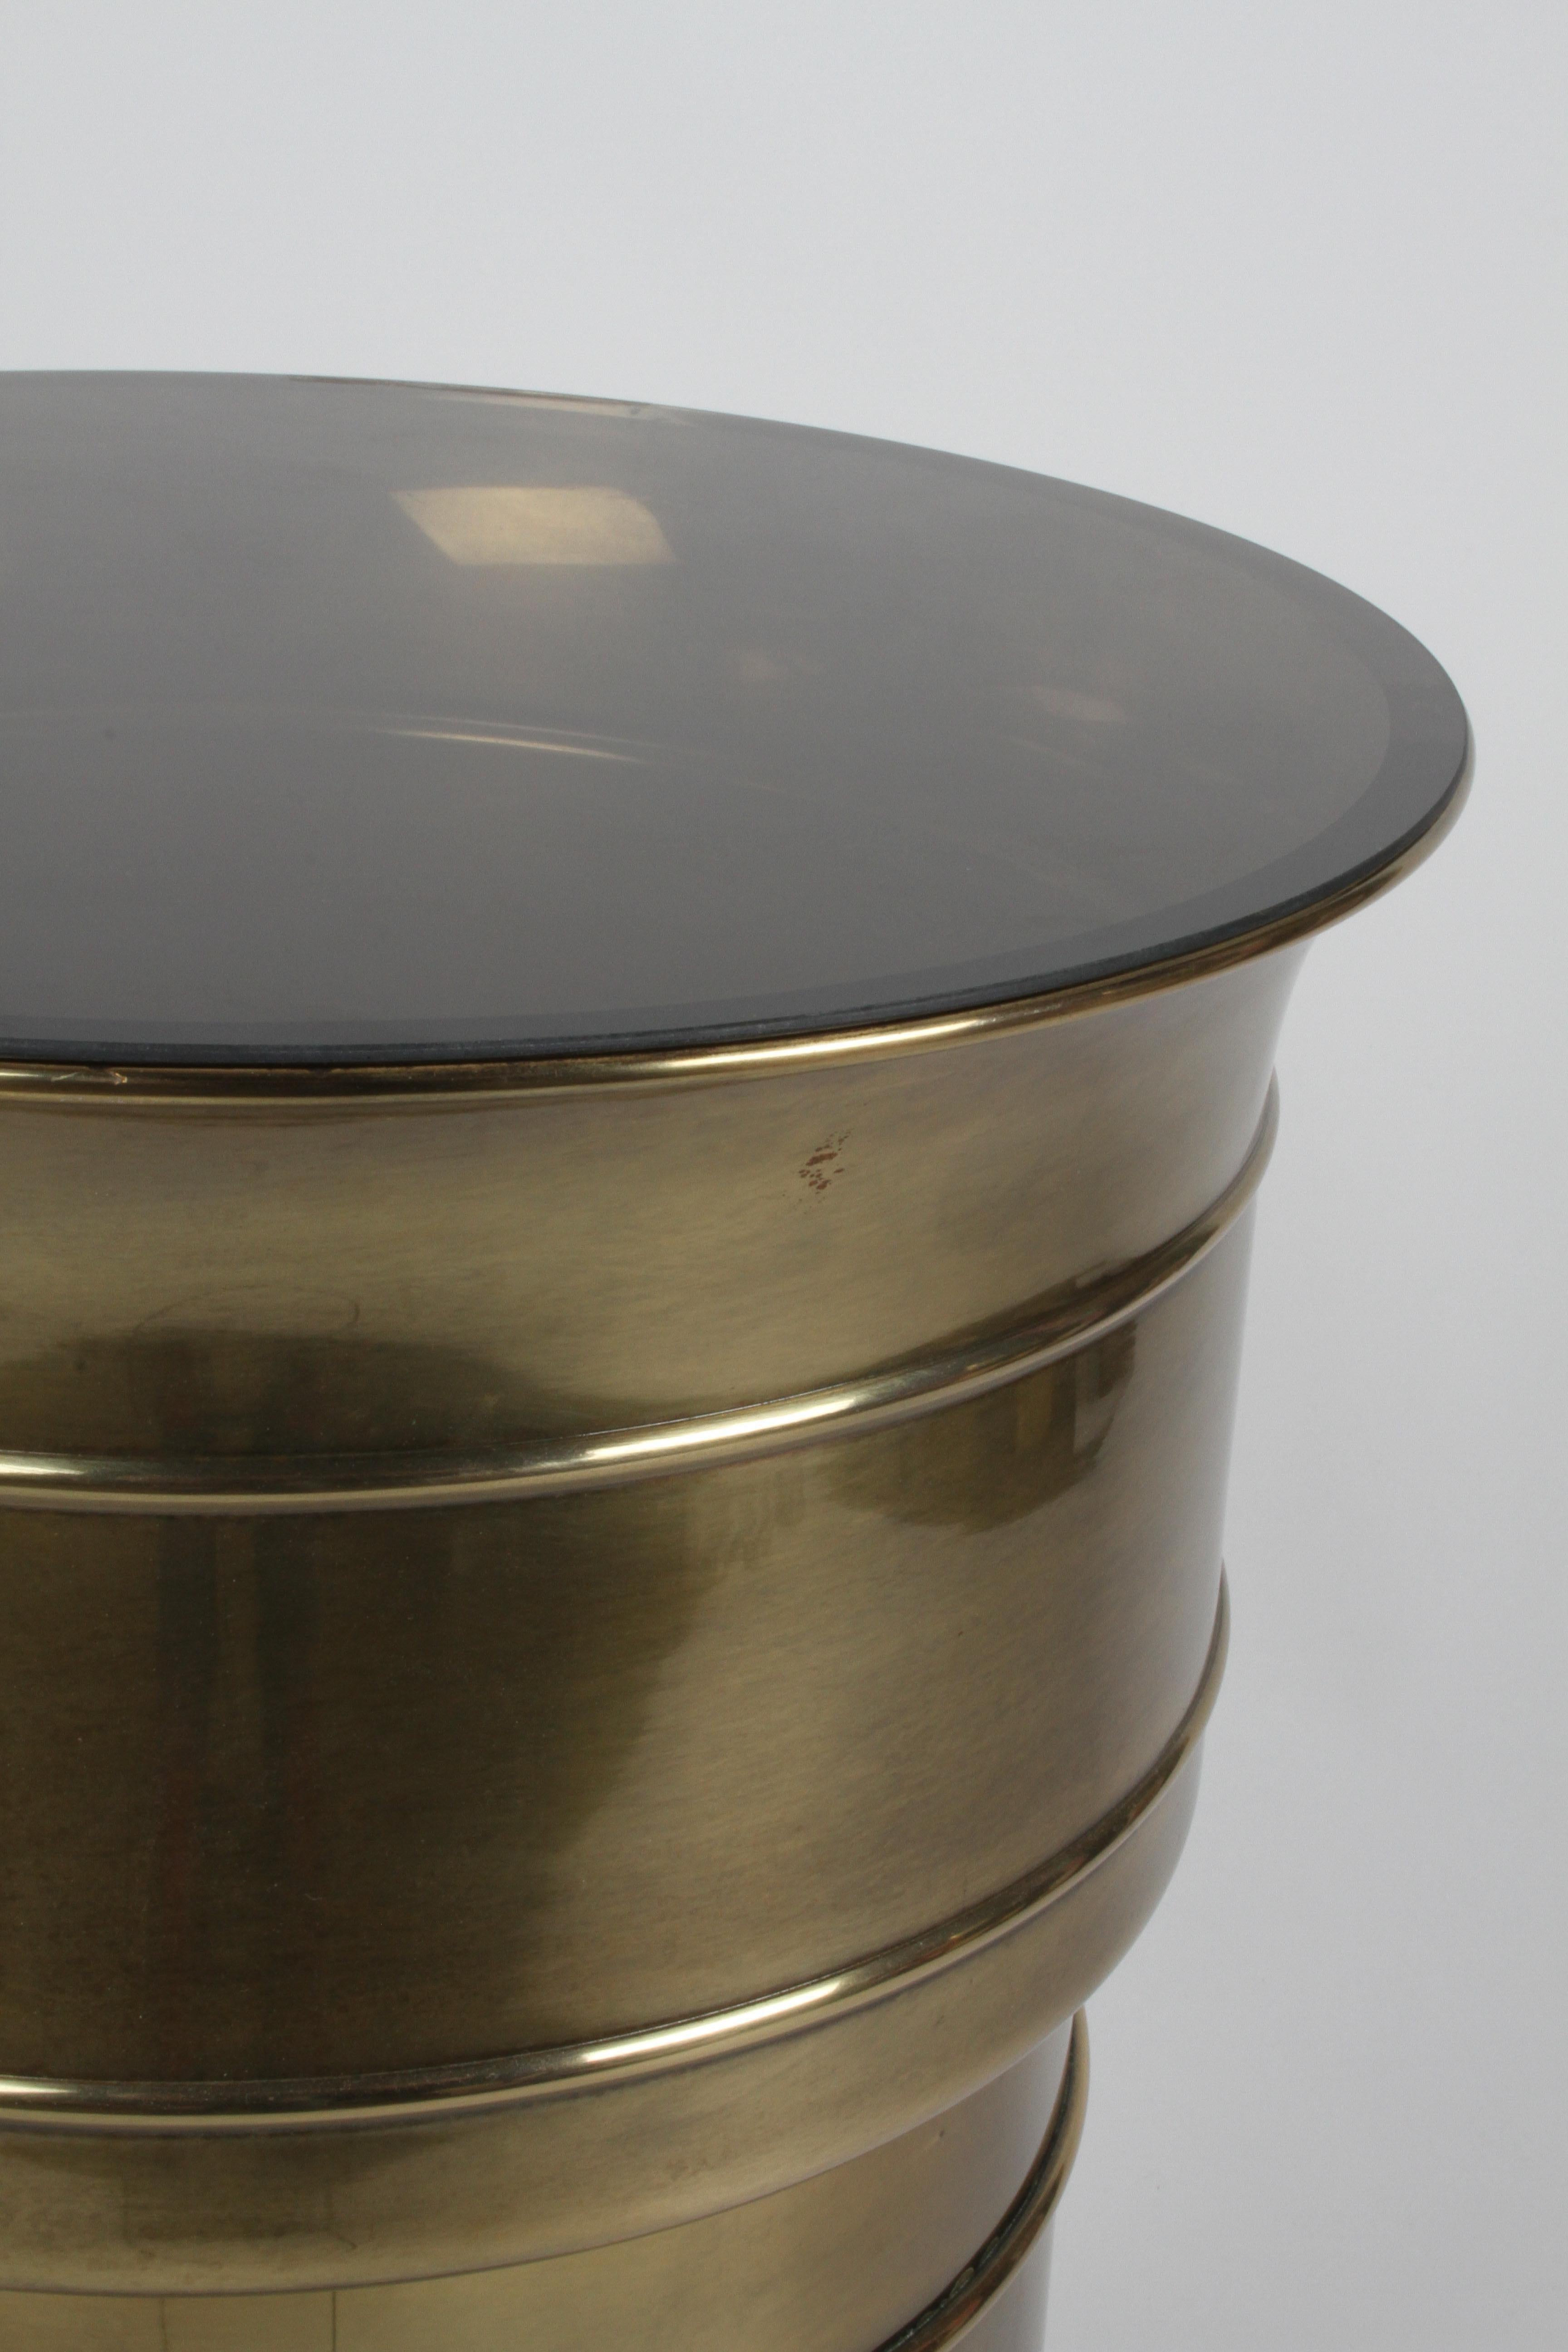 Mastercraft Hollywood Regency Round Cylinder Brass Display Pedestal or Planter In Good Condition For Sale In St. Louis, MO